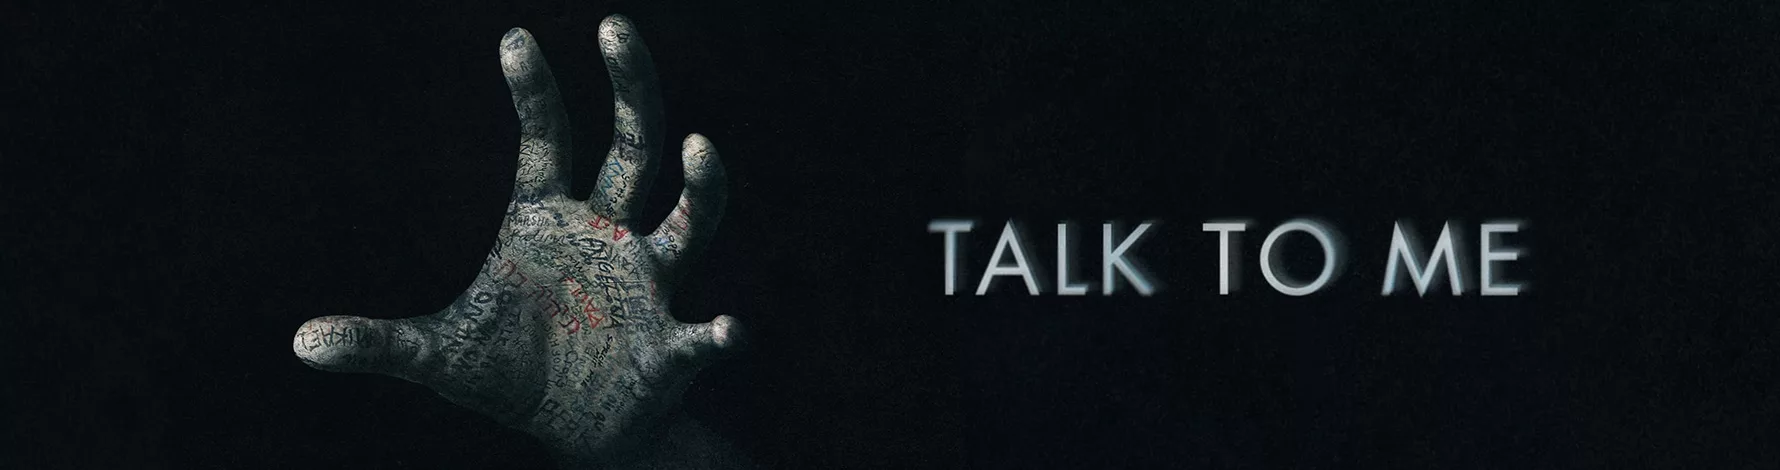 Featured image for “A24 Is Bringing The Hand From Their Hit Horror Film, “Talk To Me” To Life”